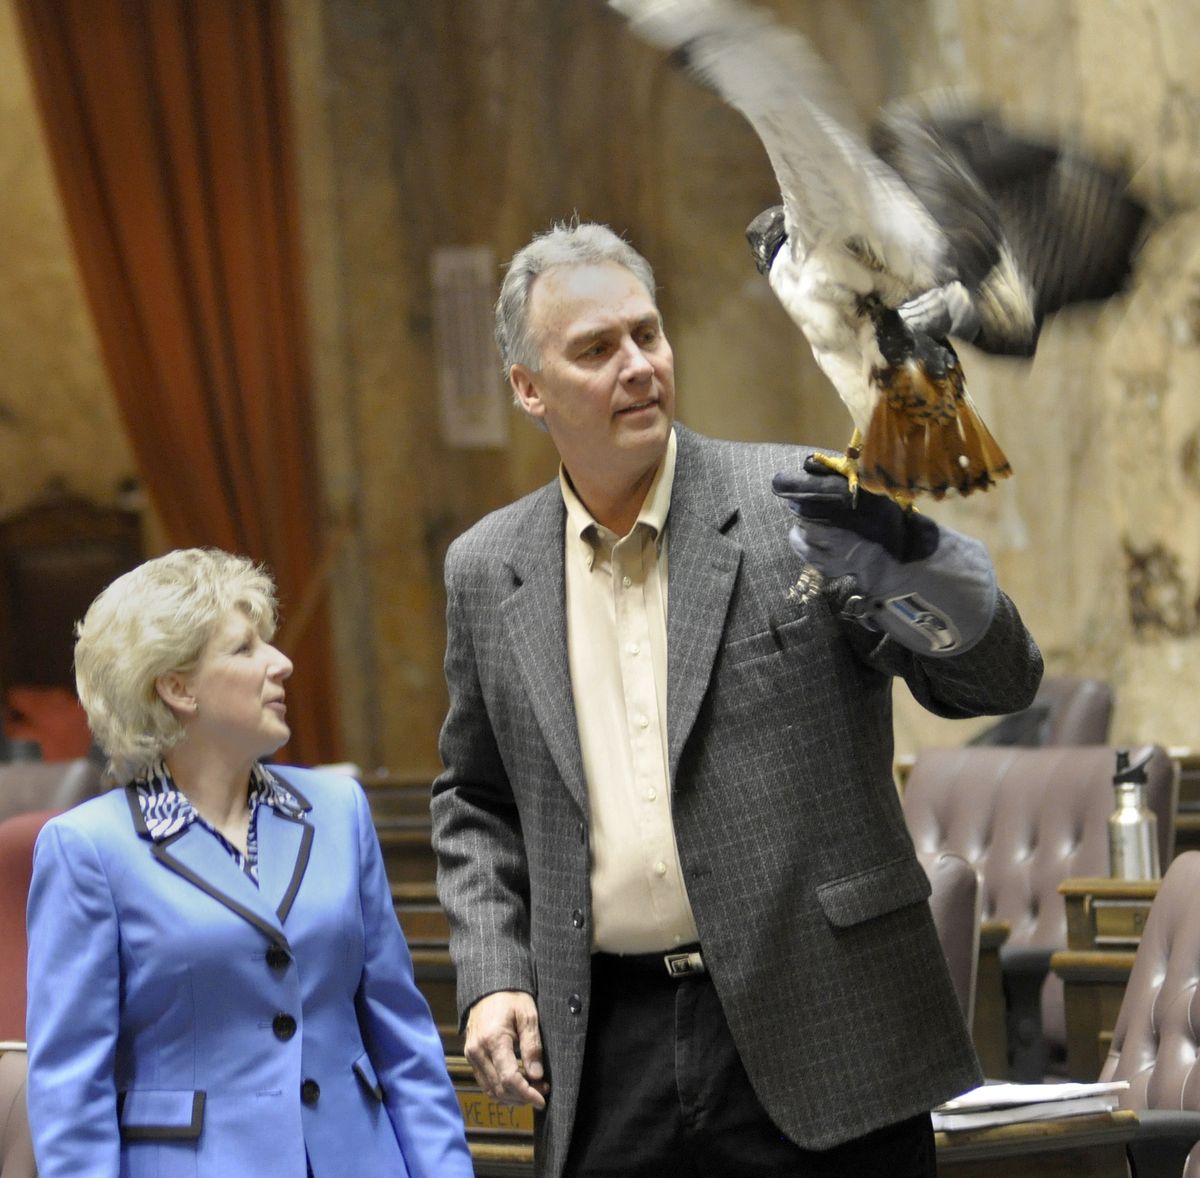 Rep. Shelly Short, R-Addy, meets Taima the Seattle Seahawks mascot and his owner/trainer David Knutson on the floor of the state House of Representatives. (Jim Camden)